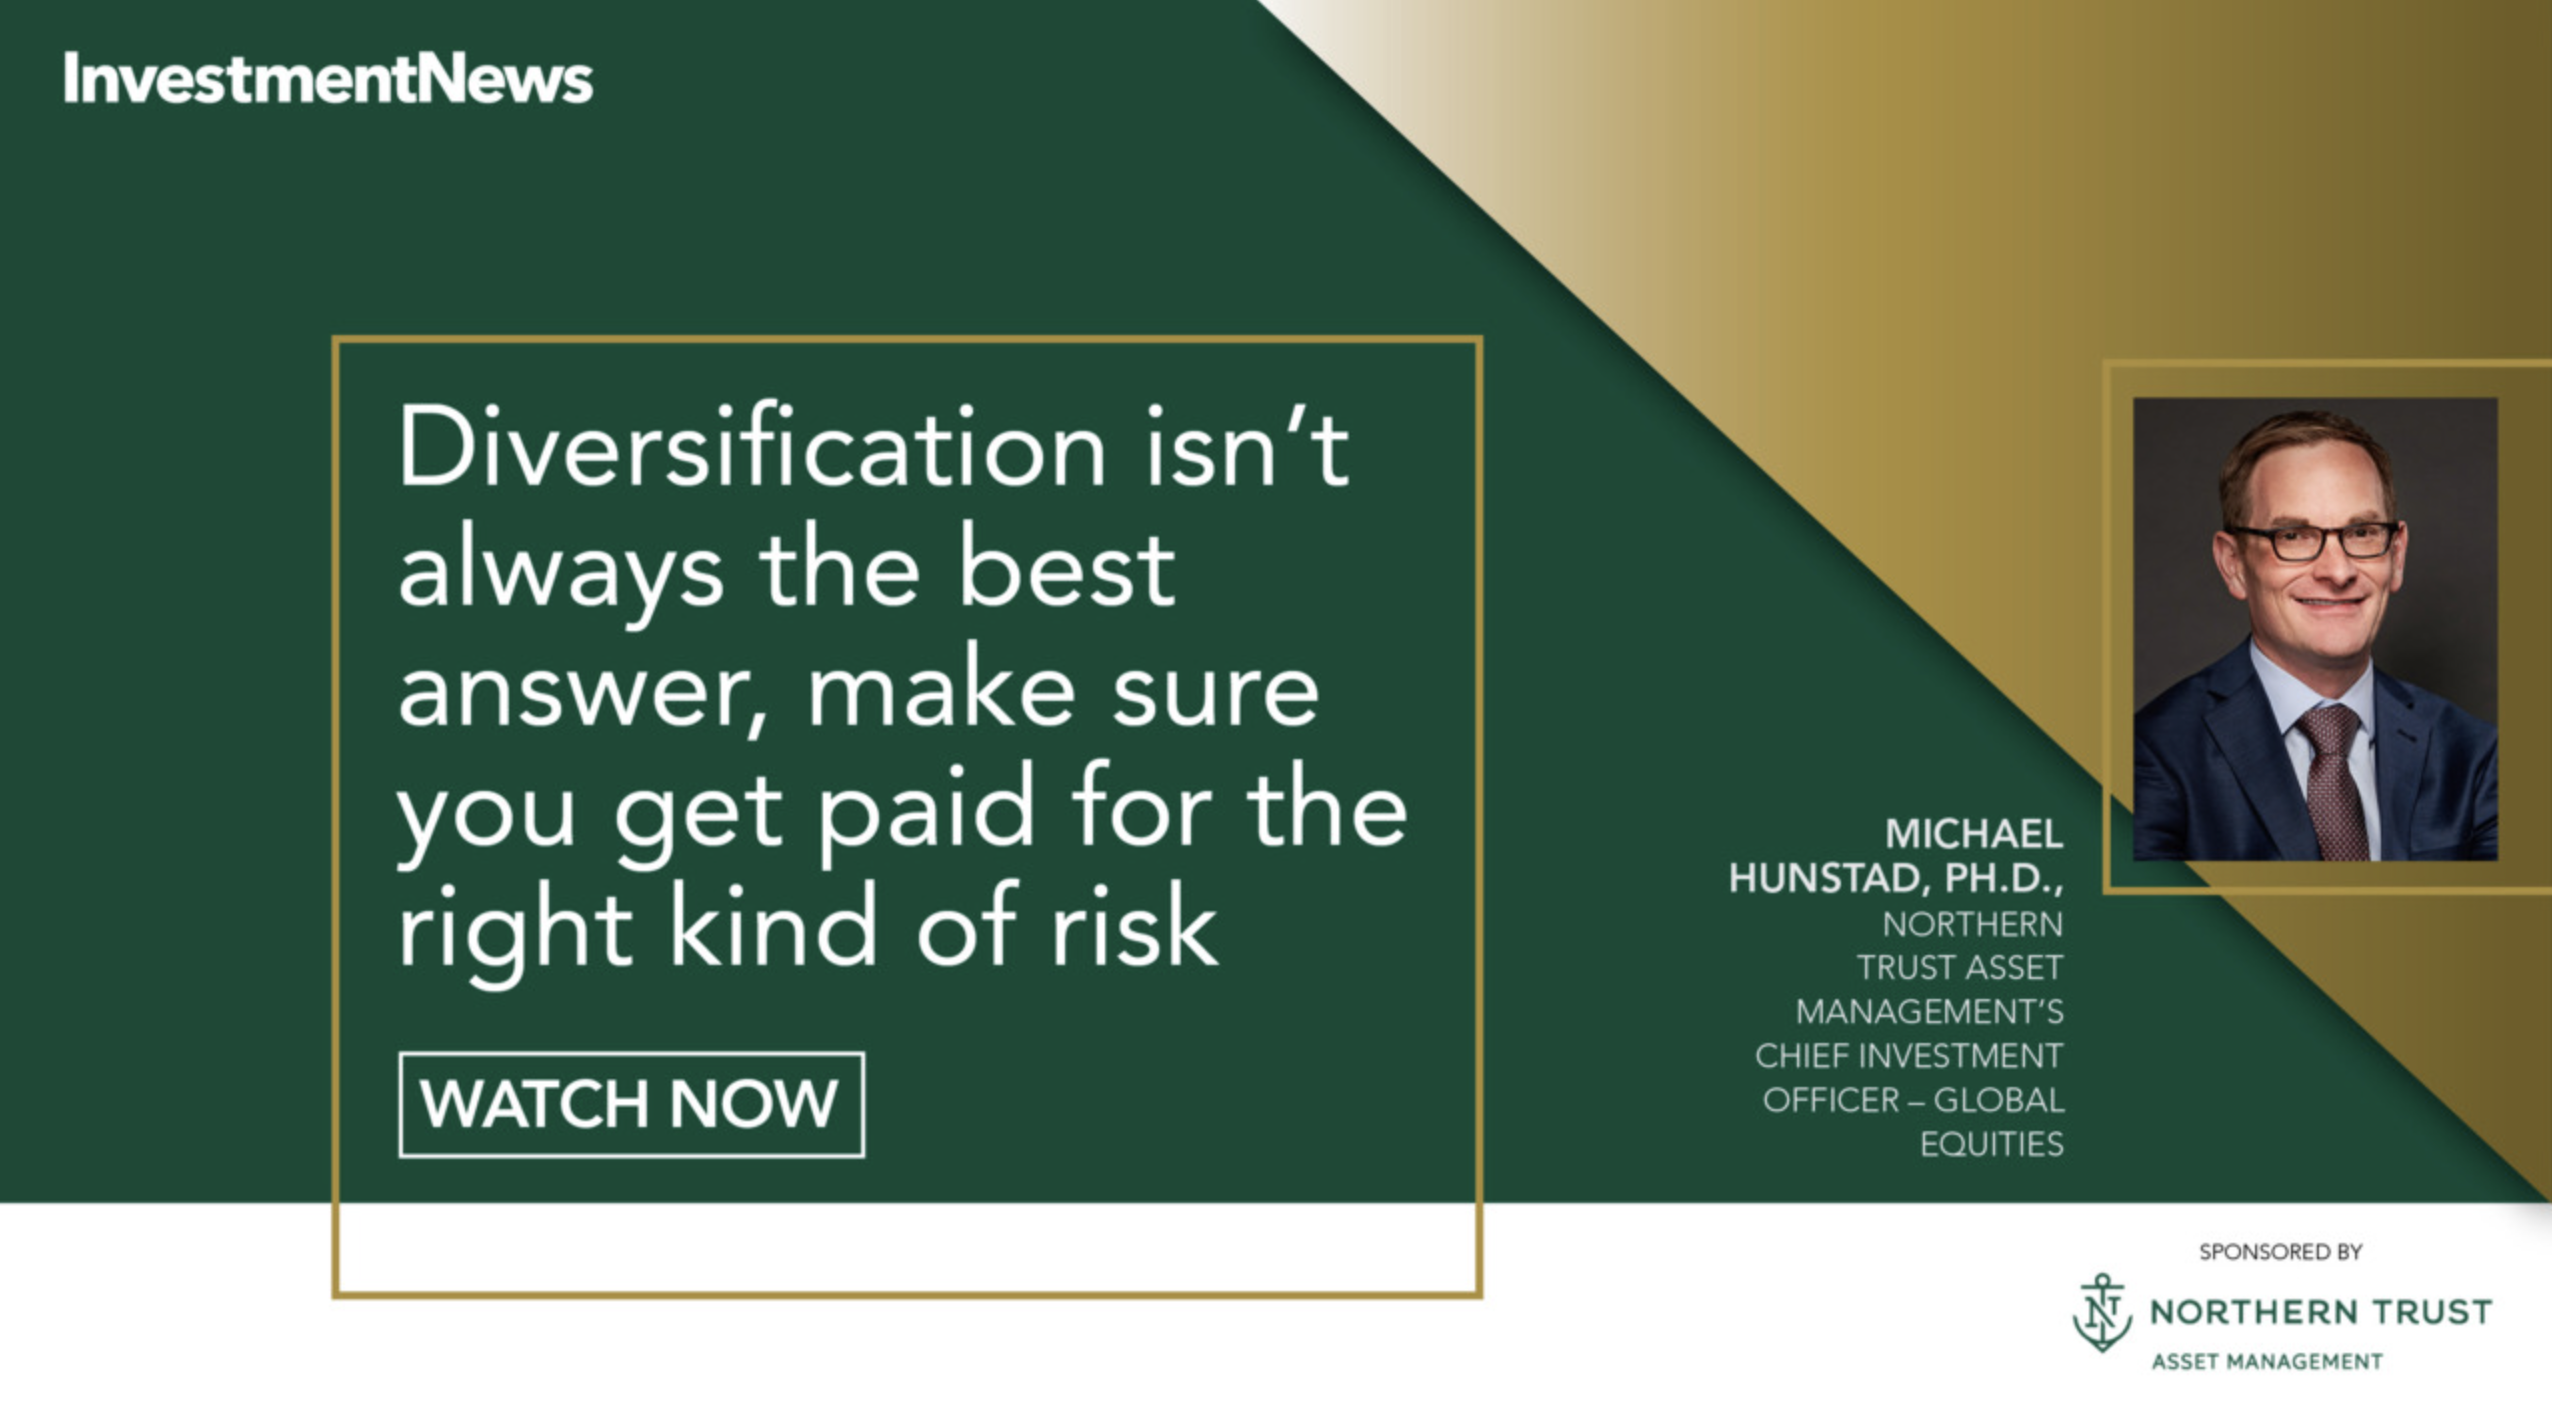 Diversification isn’t always the best answer, make sure you get paid for the right kind of risk